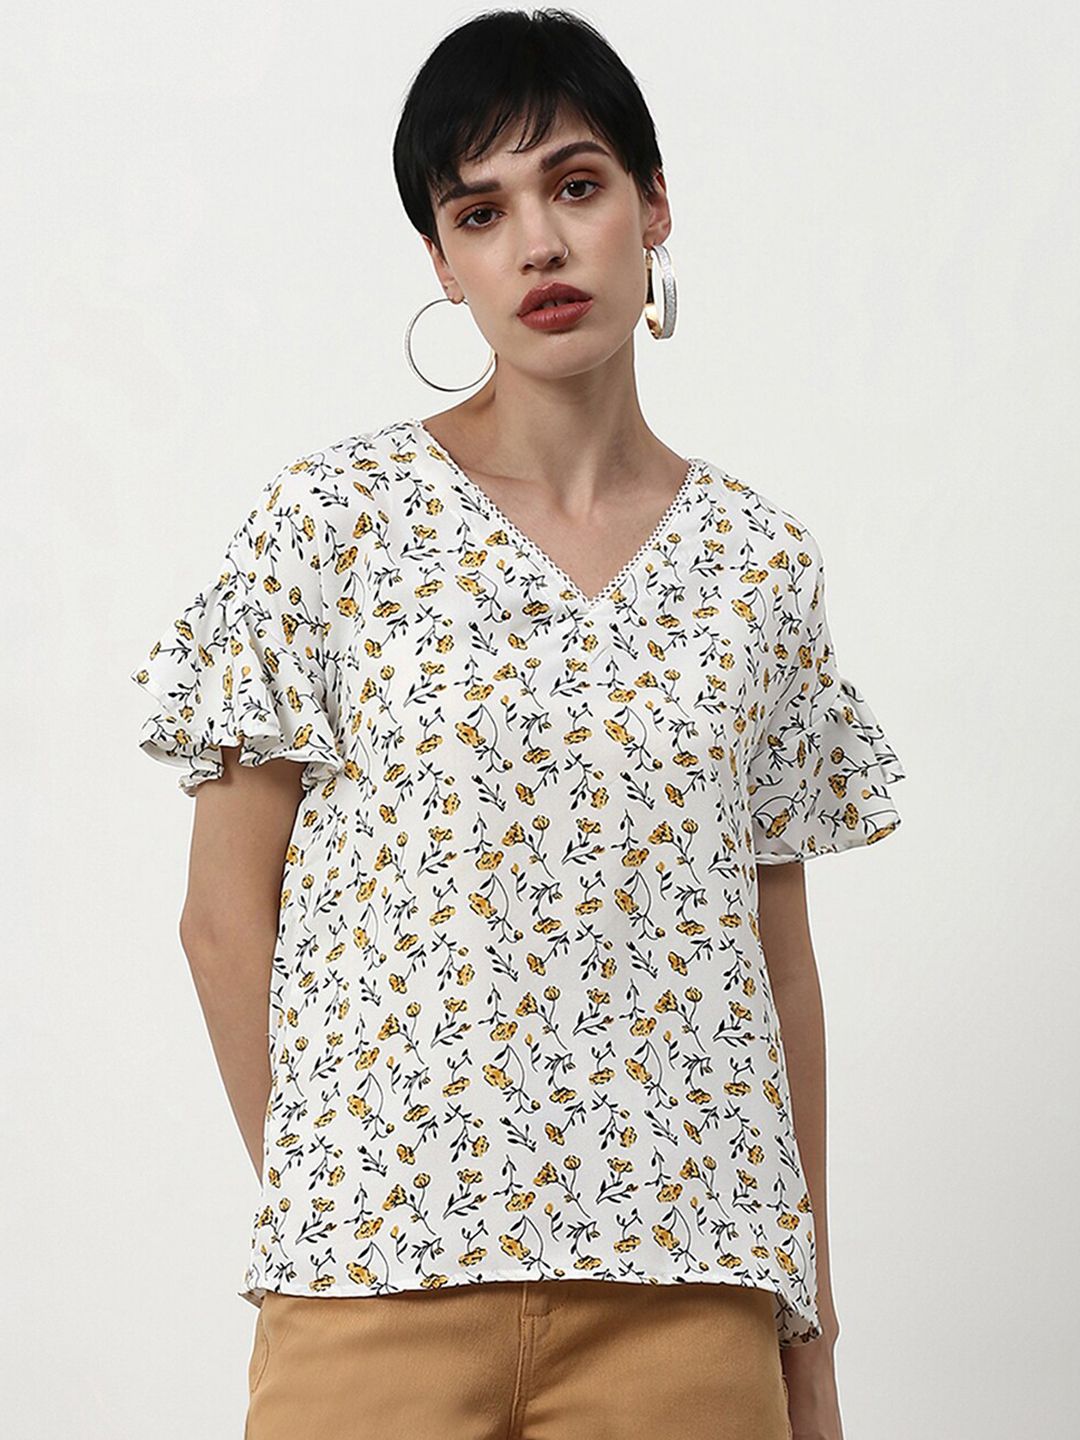 abof White Floral Print Top Price in India